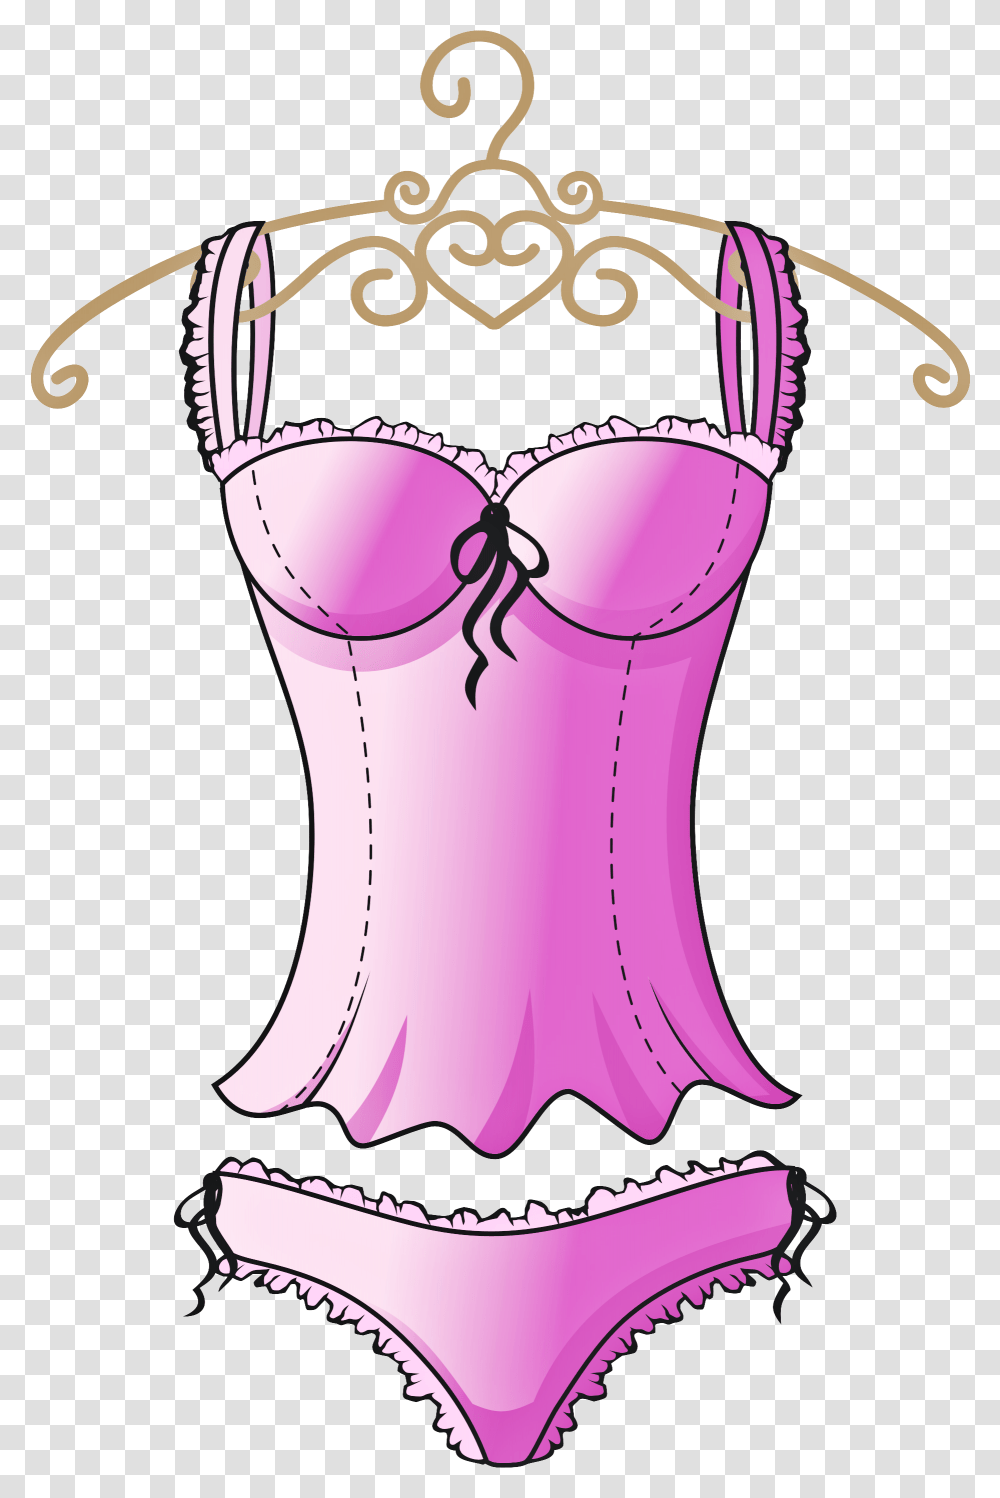 Lingerie Image With No Background Background Lingerie, Clothing, Apparel, Underwear, Bra Transparent Png